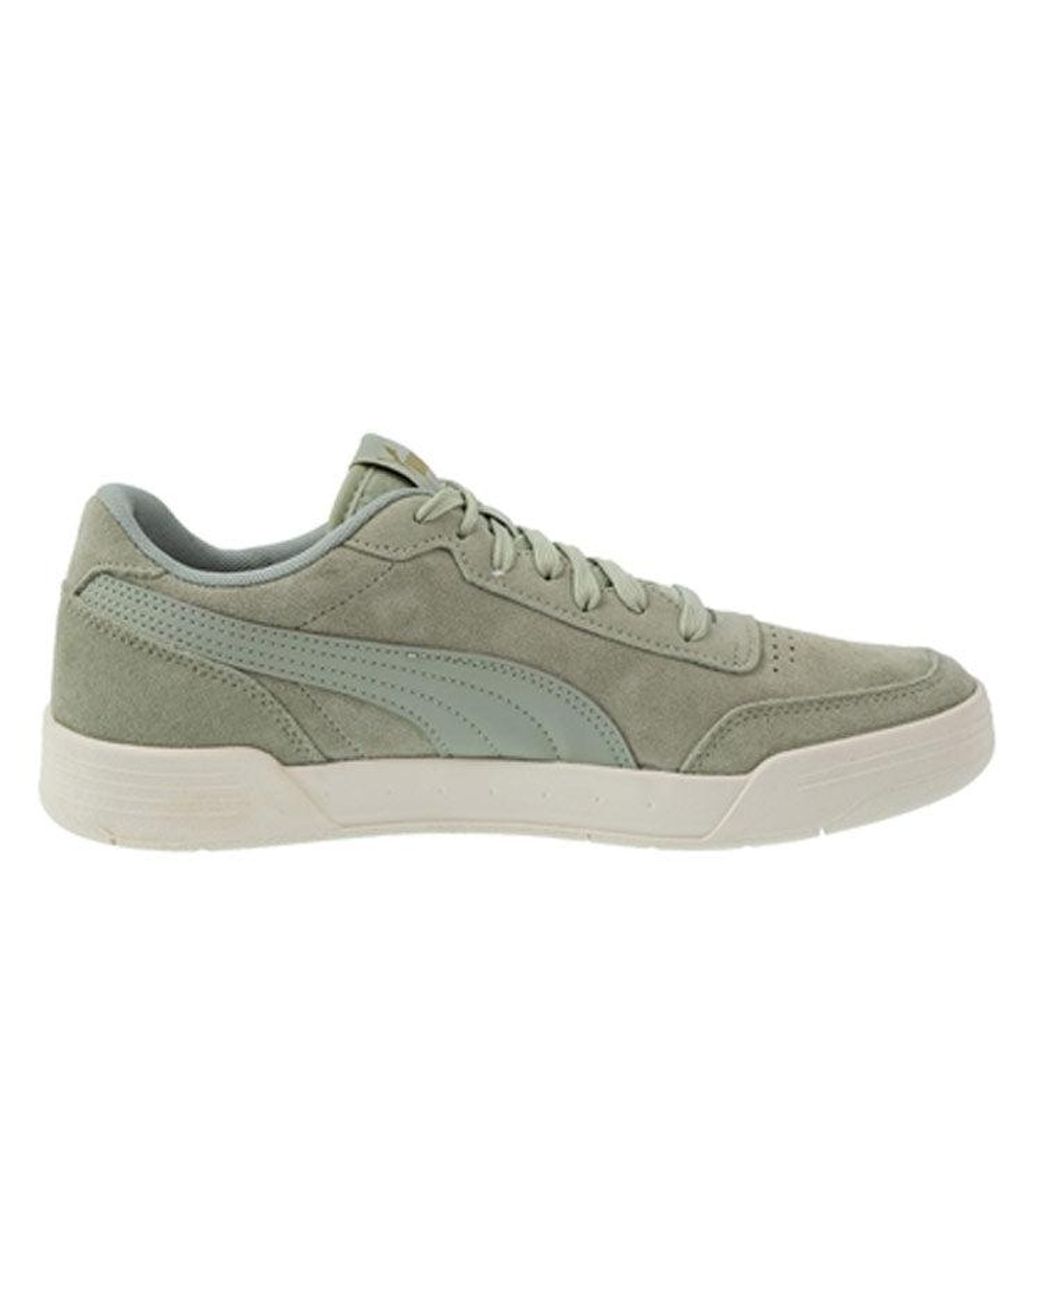 PUMA Caracal Sneakers Green for Men | Lyst